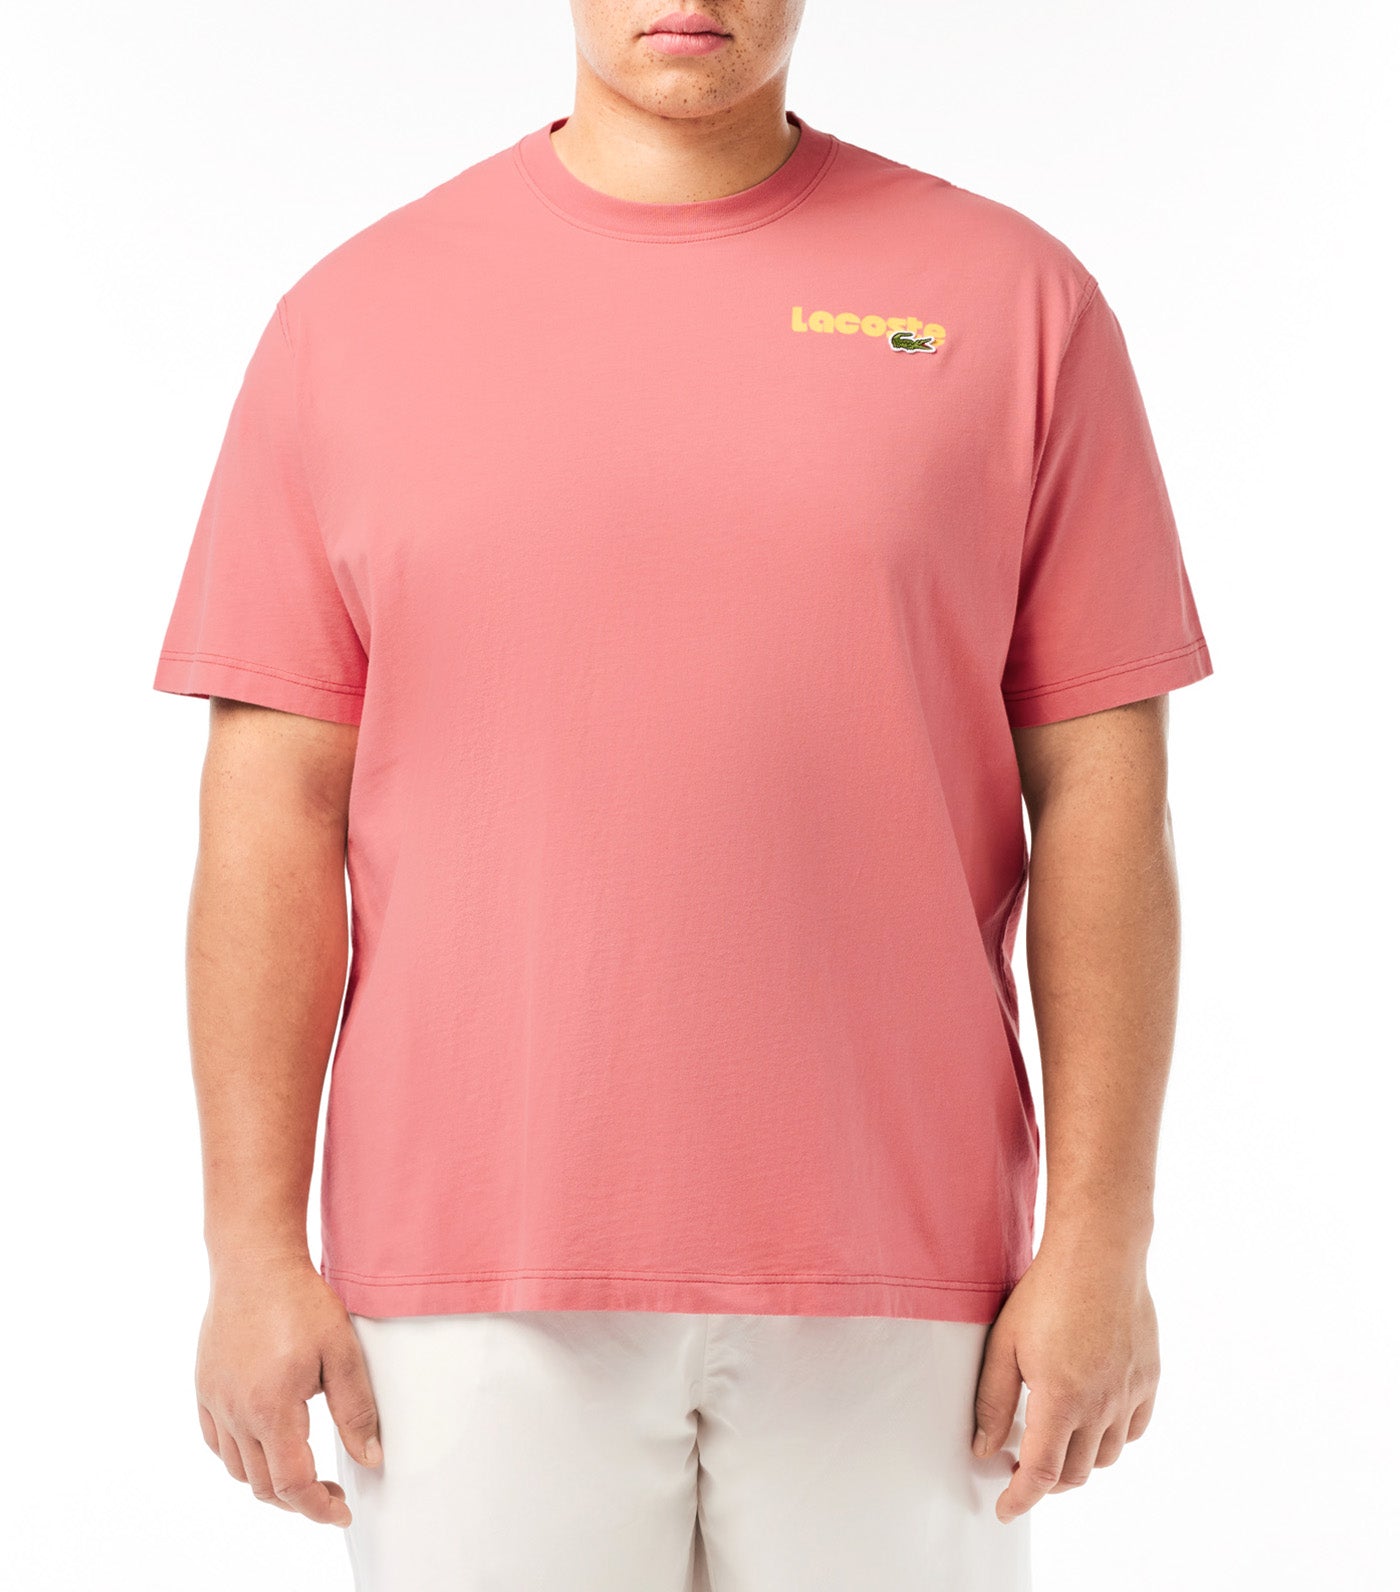 Washed Effect Ombré Lacoste Print T-Shirt Sierra Red